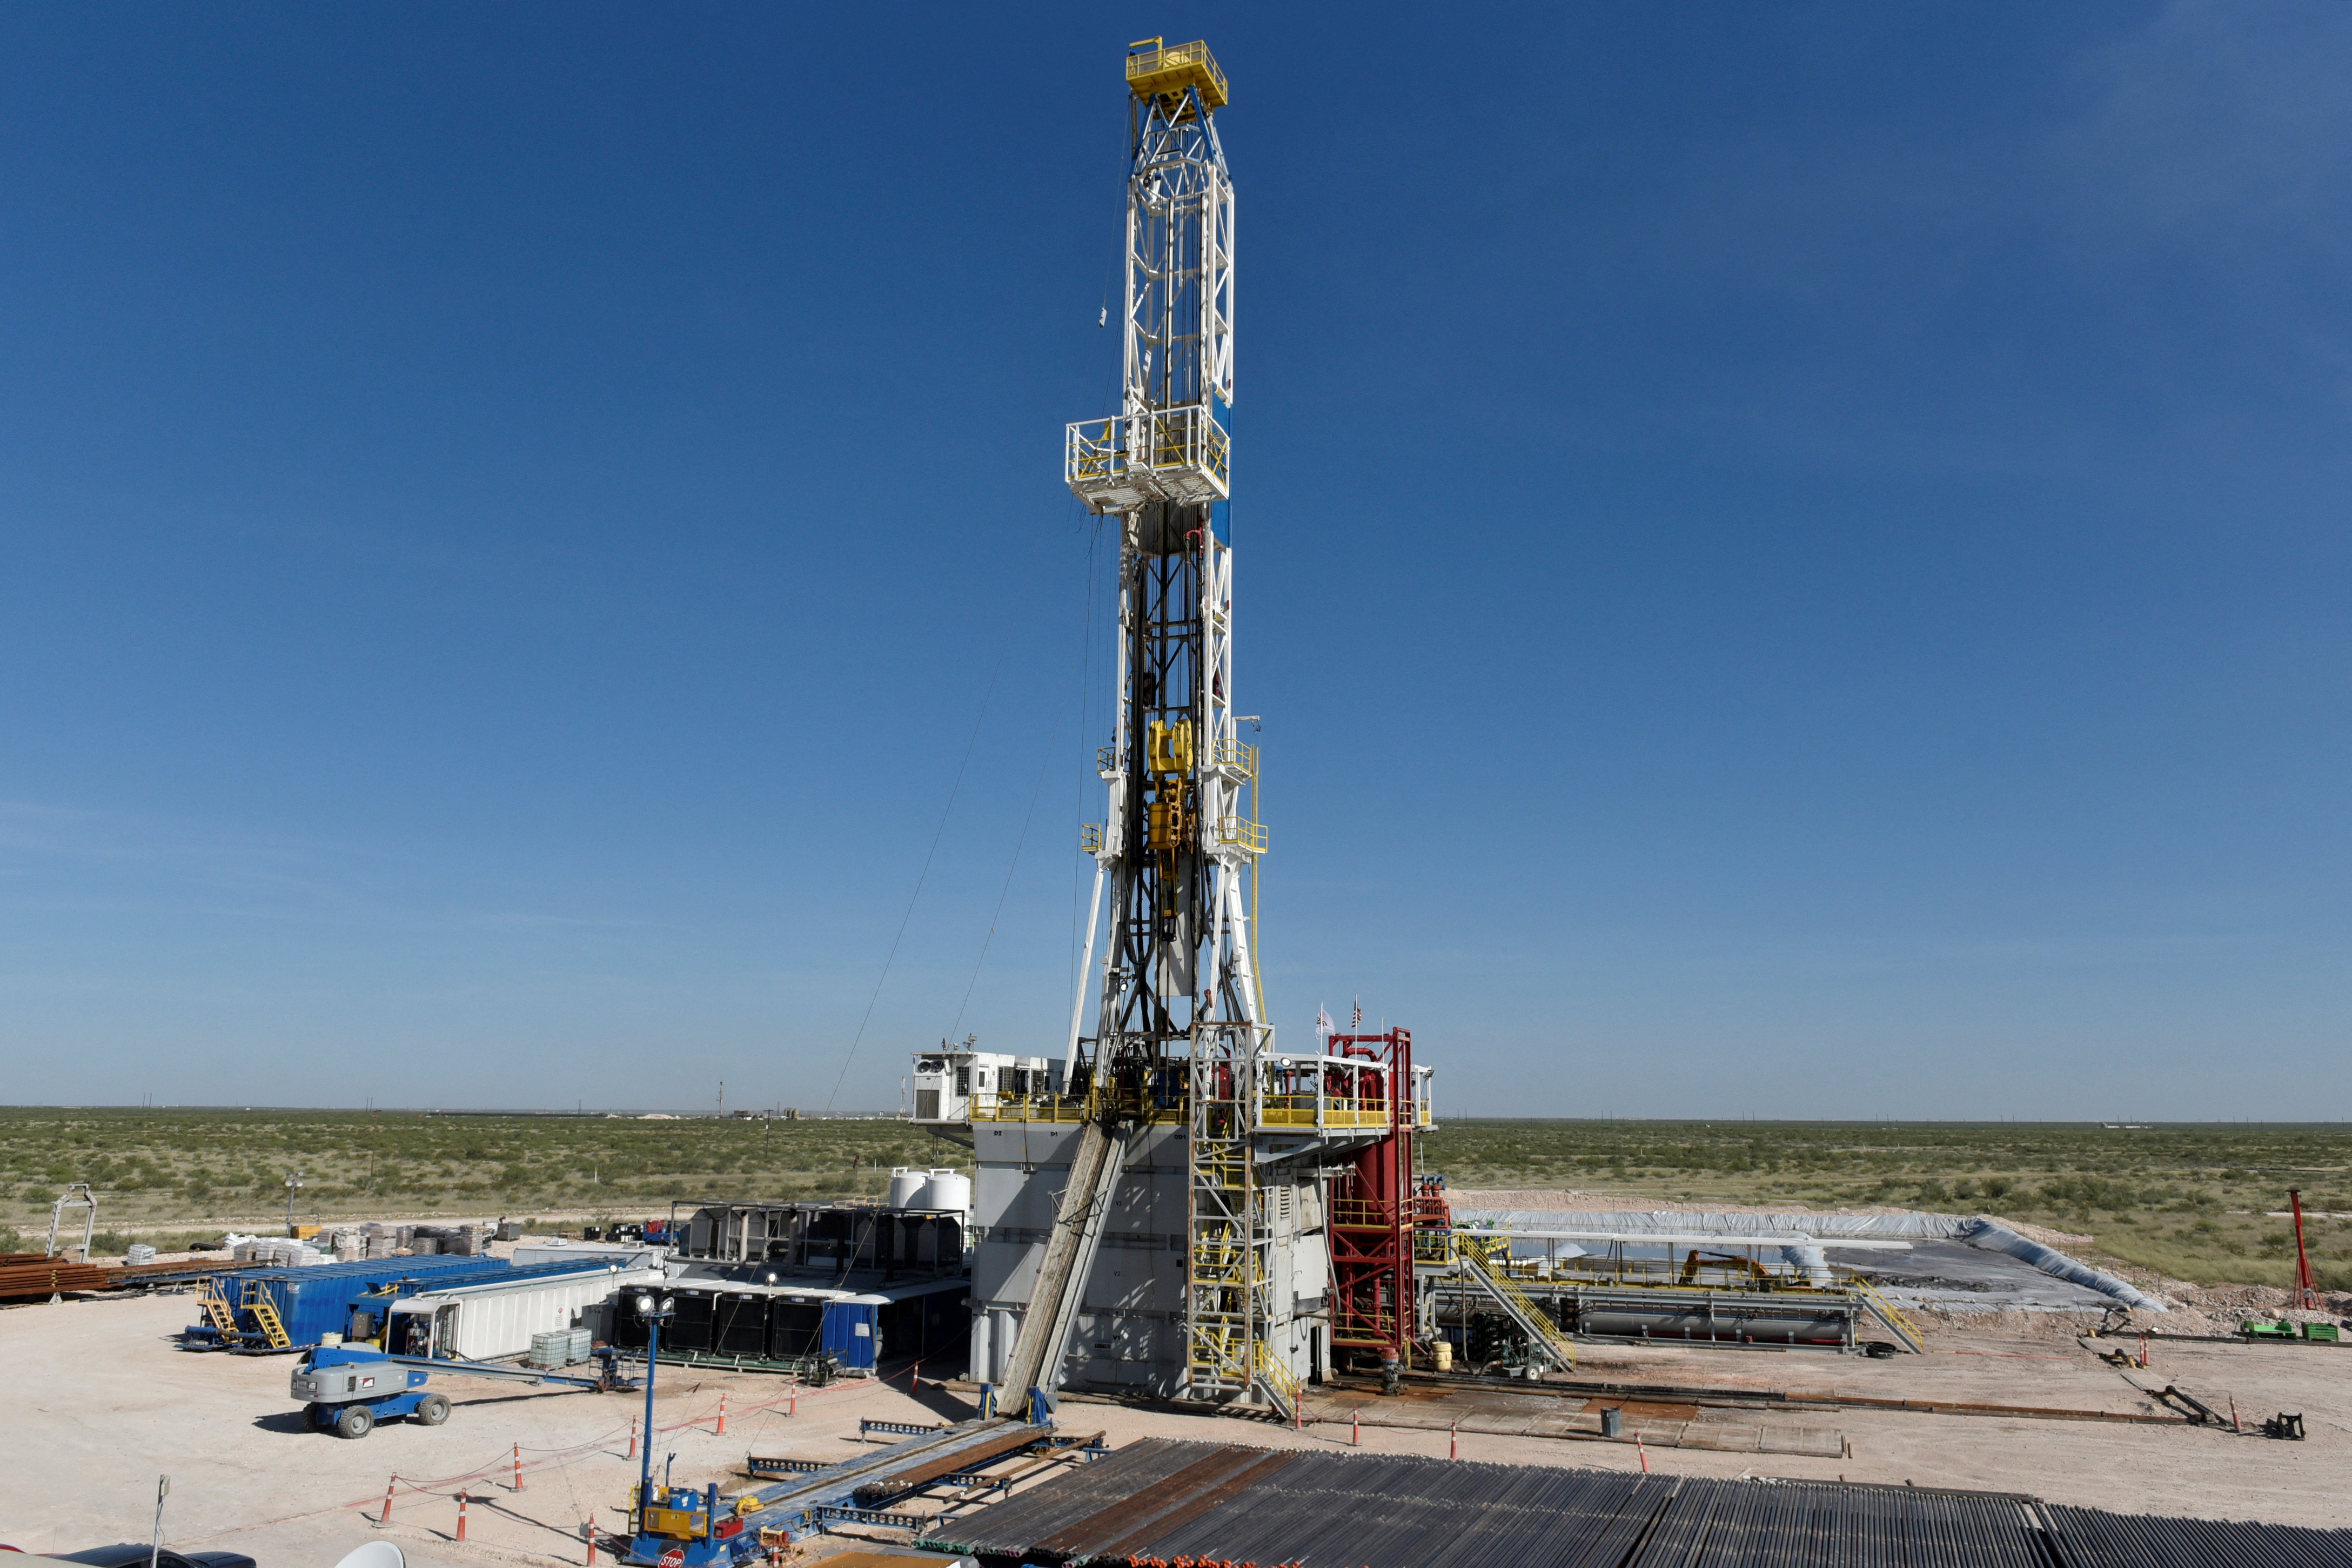 A drilling rig on a lease owned by Oasis Petroleum operates in the Permian Basin oil and natural gas production area near Wink, Texas U.S. August 22, 2018. Picture taken August 22, 2018. REUTERS/Nick Oxford